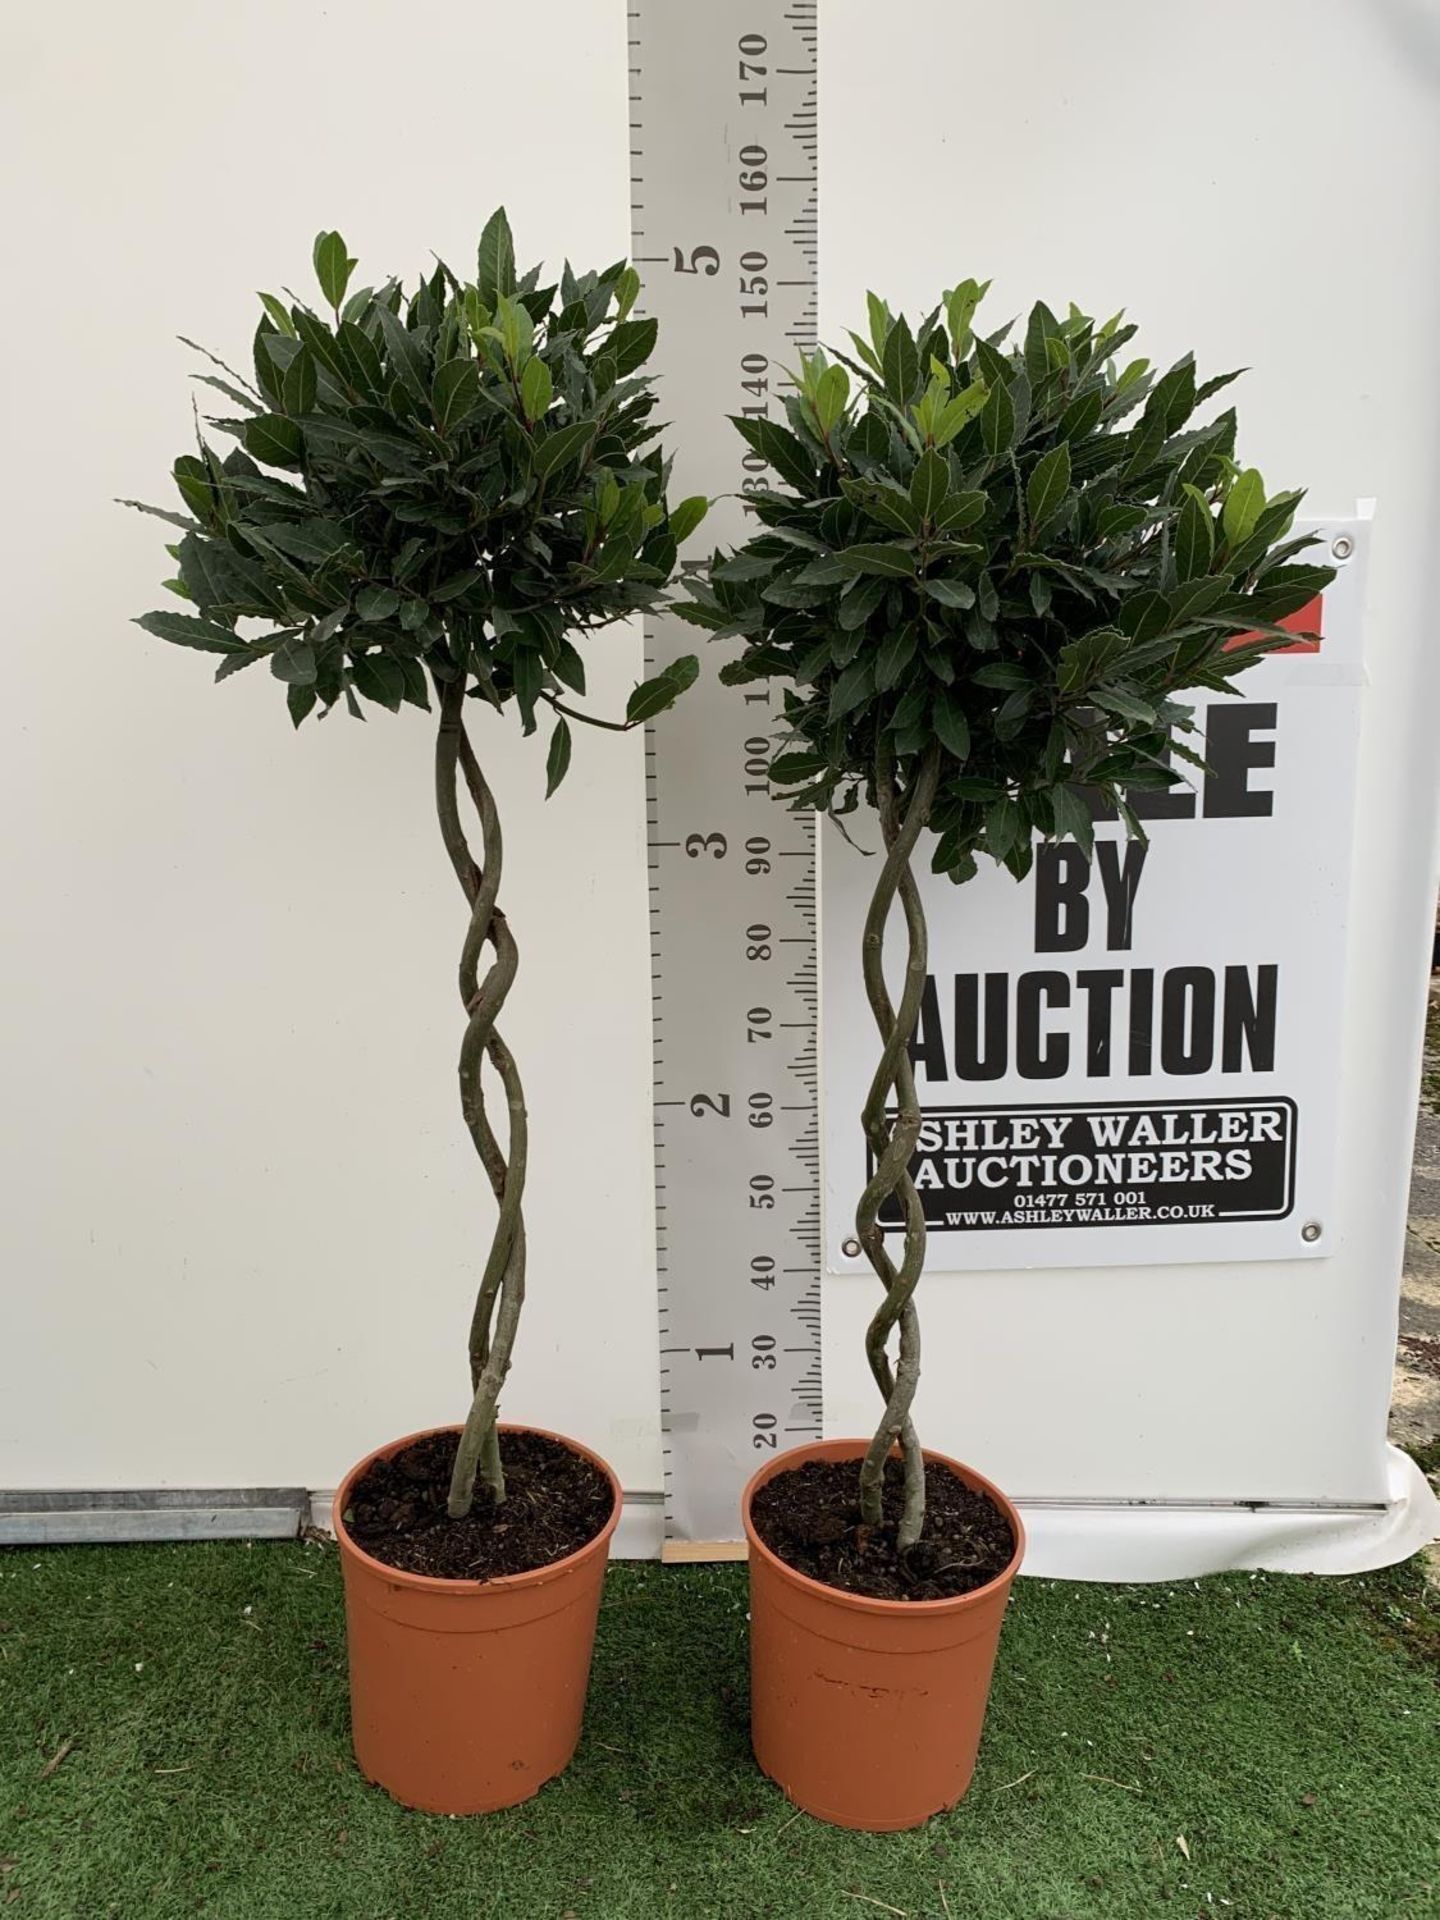 WELCOME TO ASHLEY WALLER HORTICULTURE AUCTION - LOTS ARE BEING ADDED DAILY - THE IMAGES SHOW LOTS - Image 11 of 19